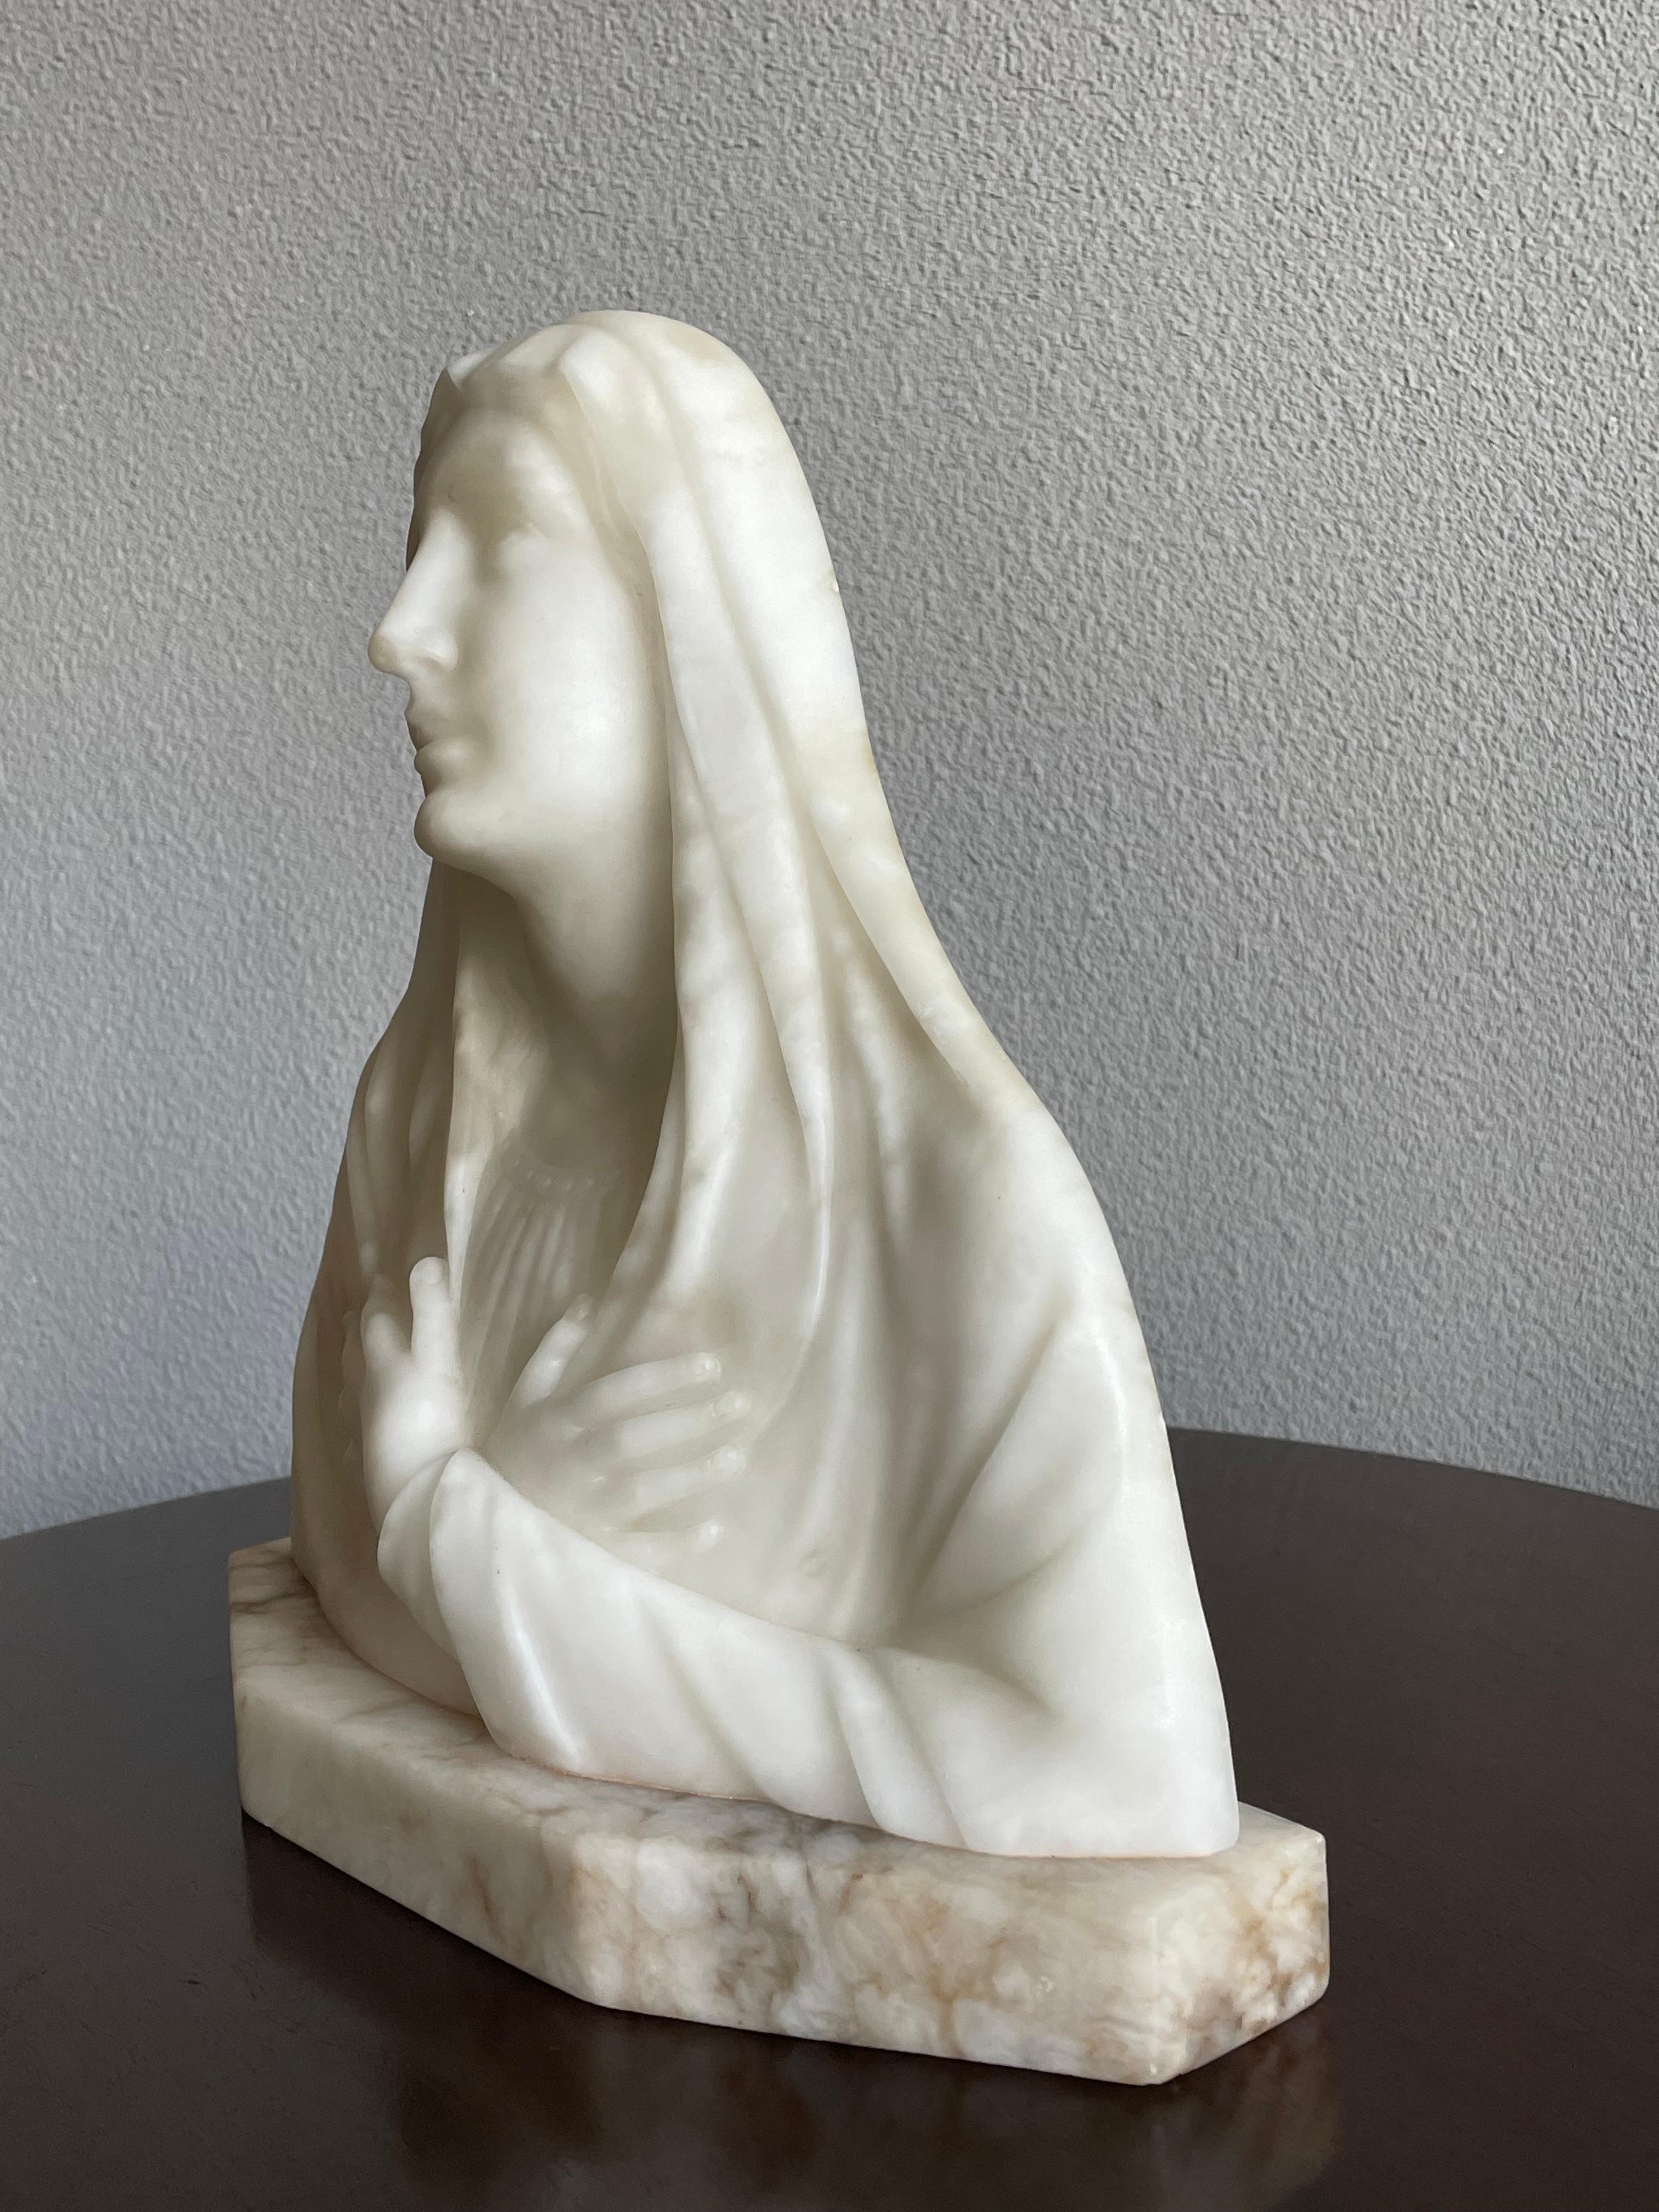 20th Century Rare Hand Carved Early 1900s Alabaster Bust Sculpture of a Mourning Virgin Mary